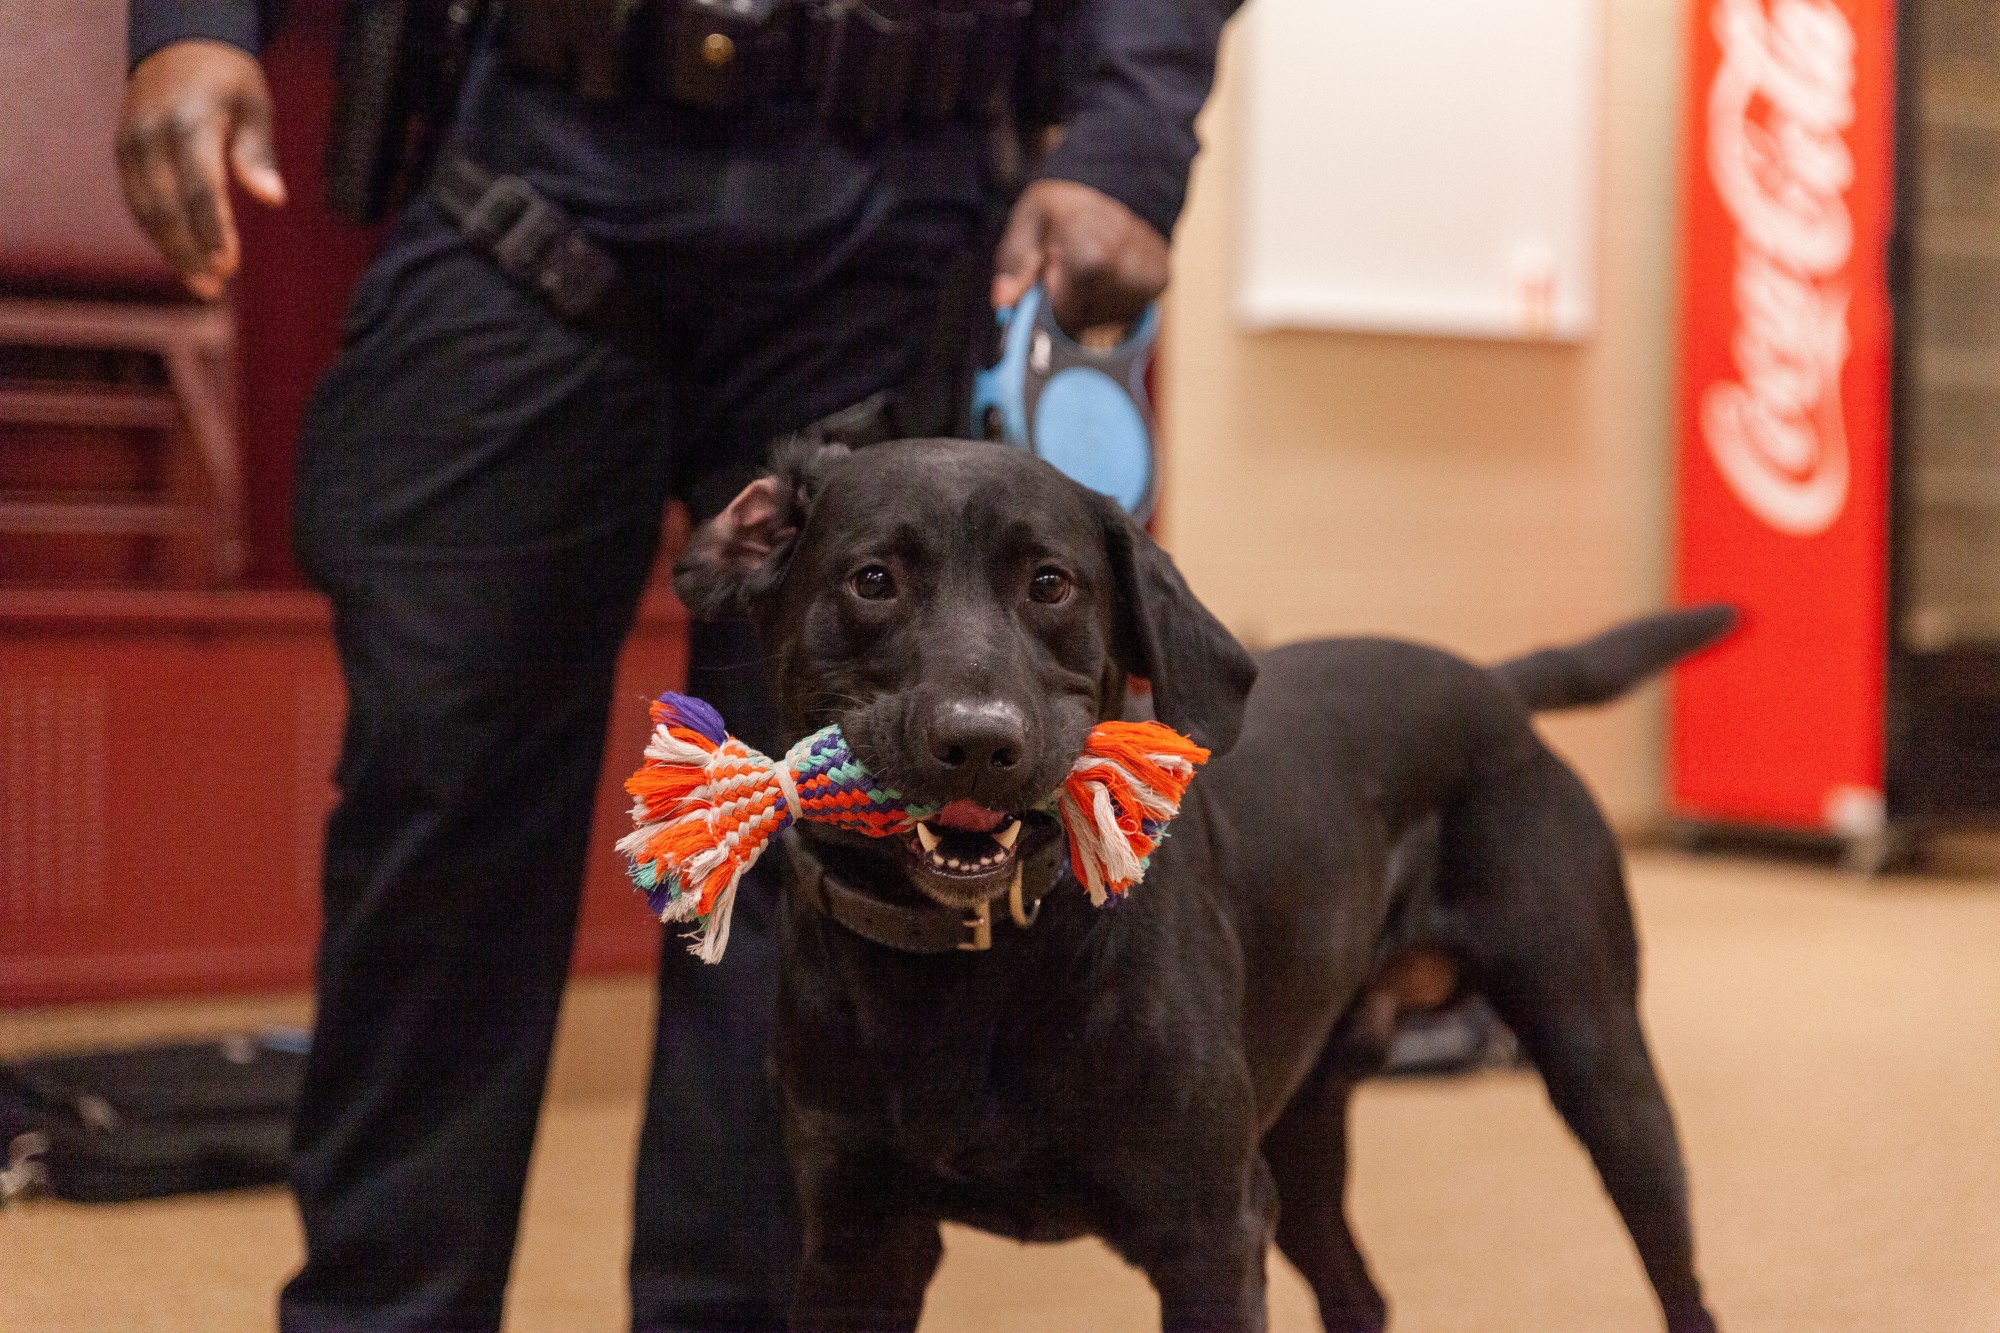 Explosives Detection Canine Gator clutches his toy at TCF Bank Stadium on Tuesday, Feb. 25. This toy is Gators primary motivator for performing the tasks given by his handler and is given as a reward each time he accomplishes them.